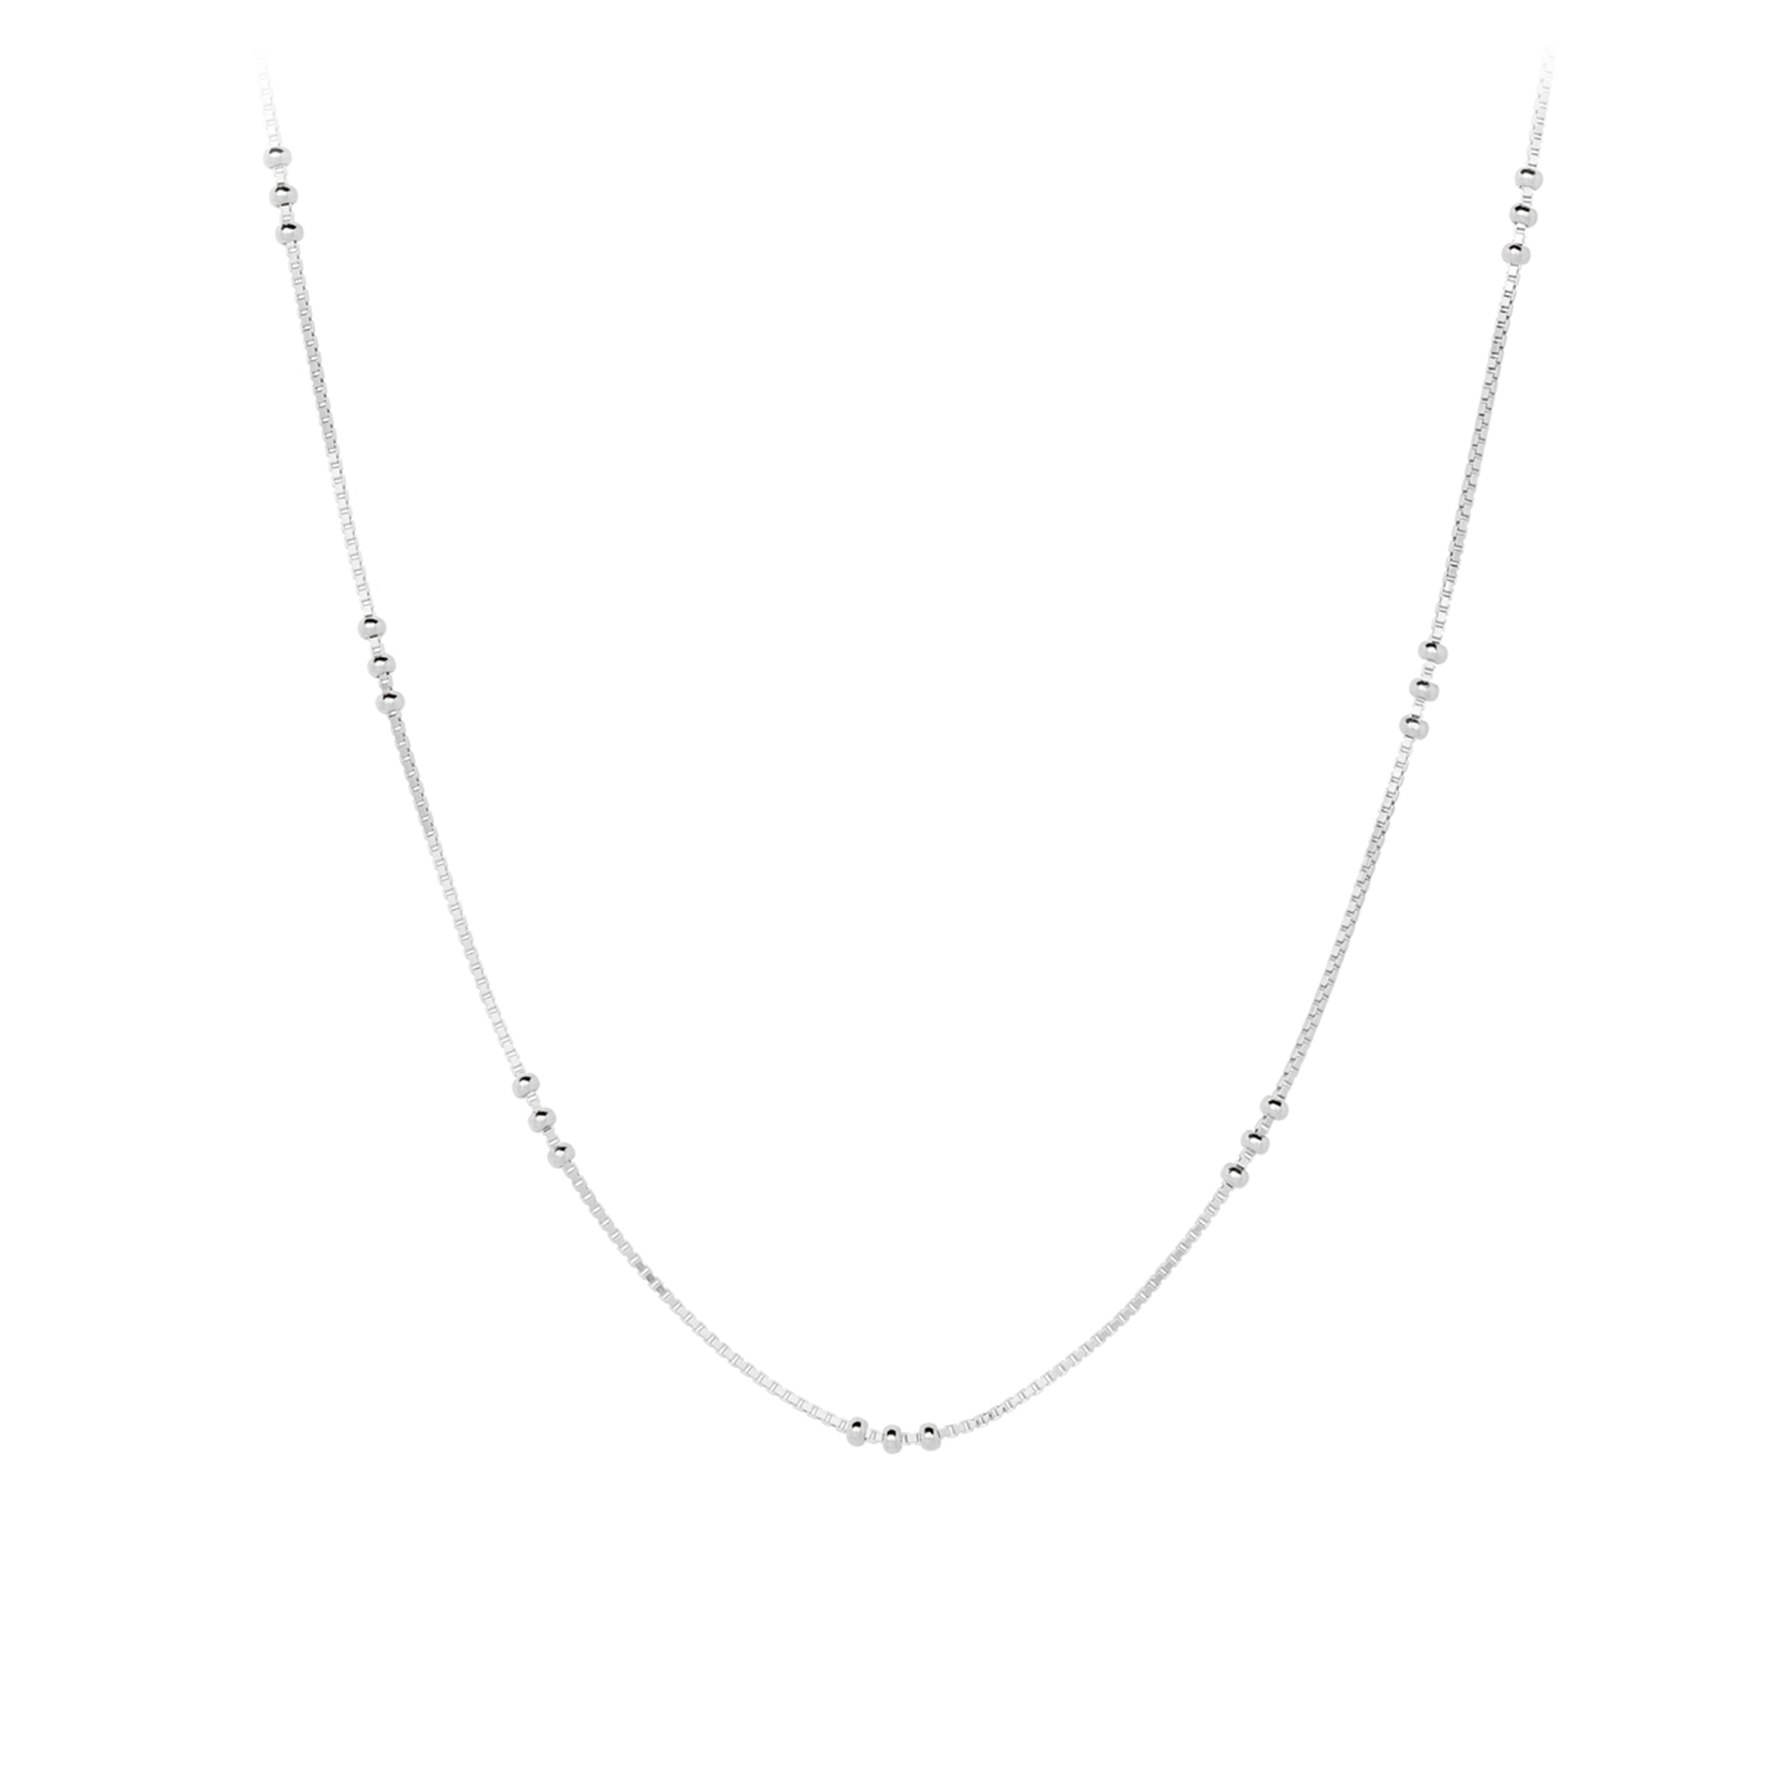 Eva Necklace from Pernille Corydon in Silver Sterling 925